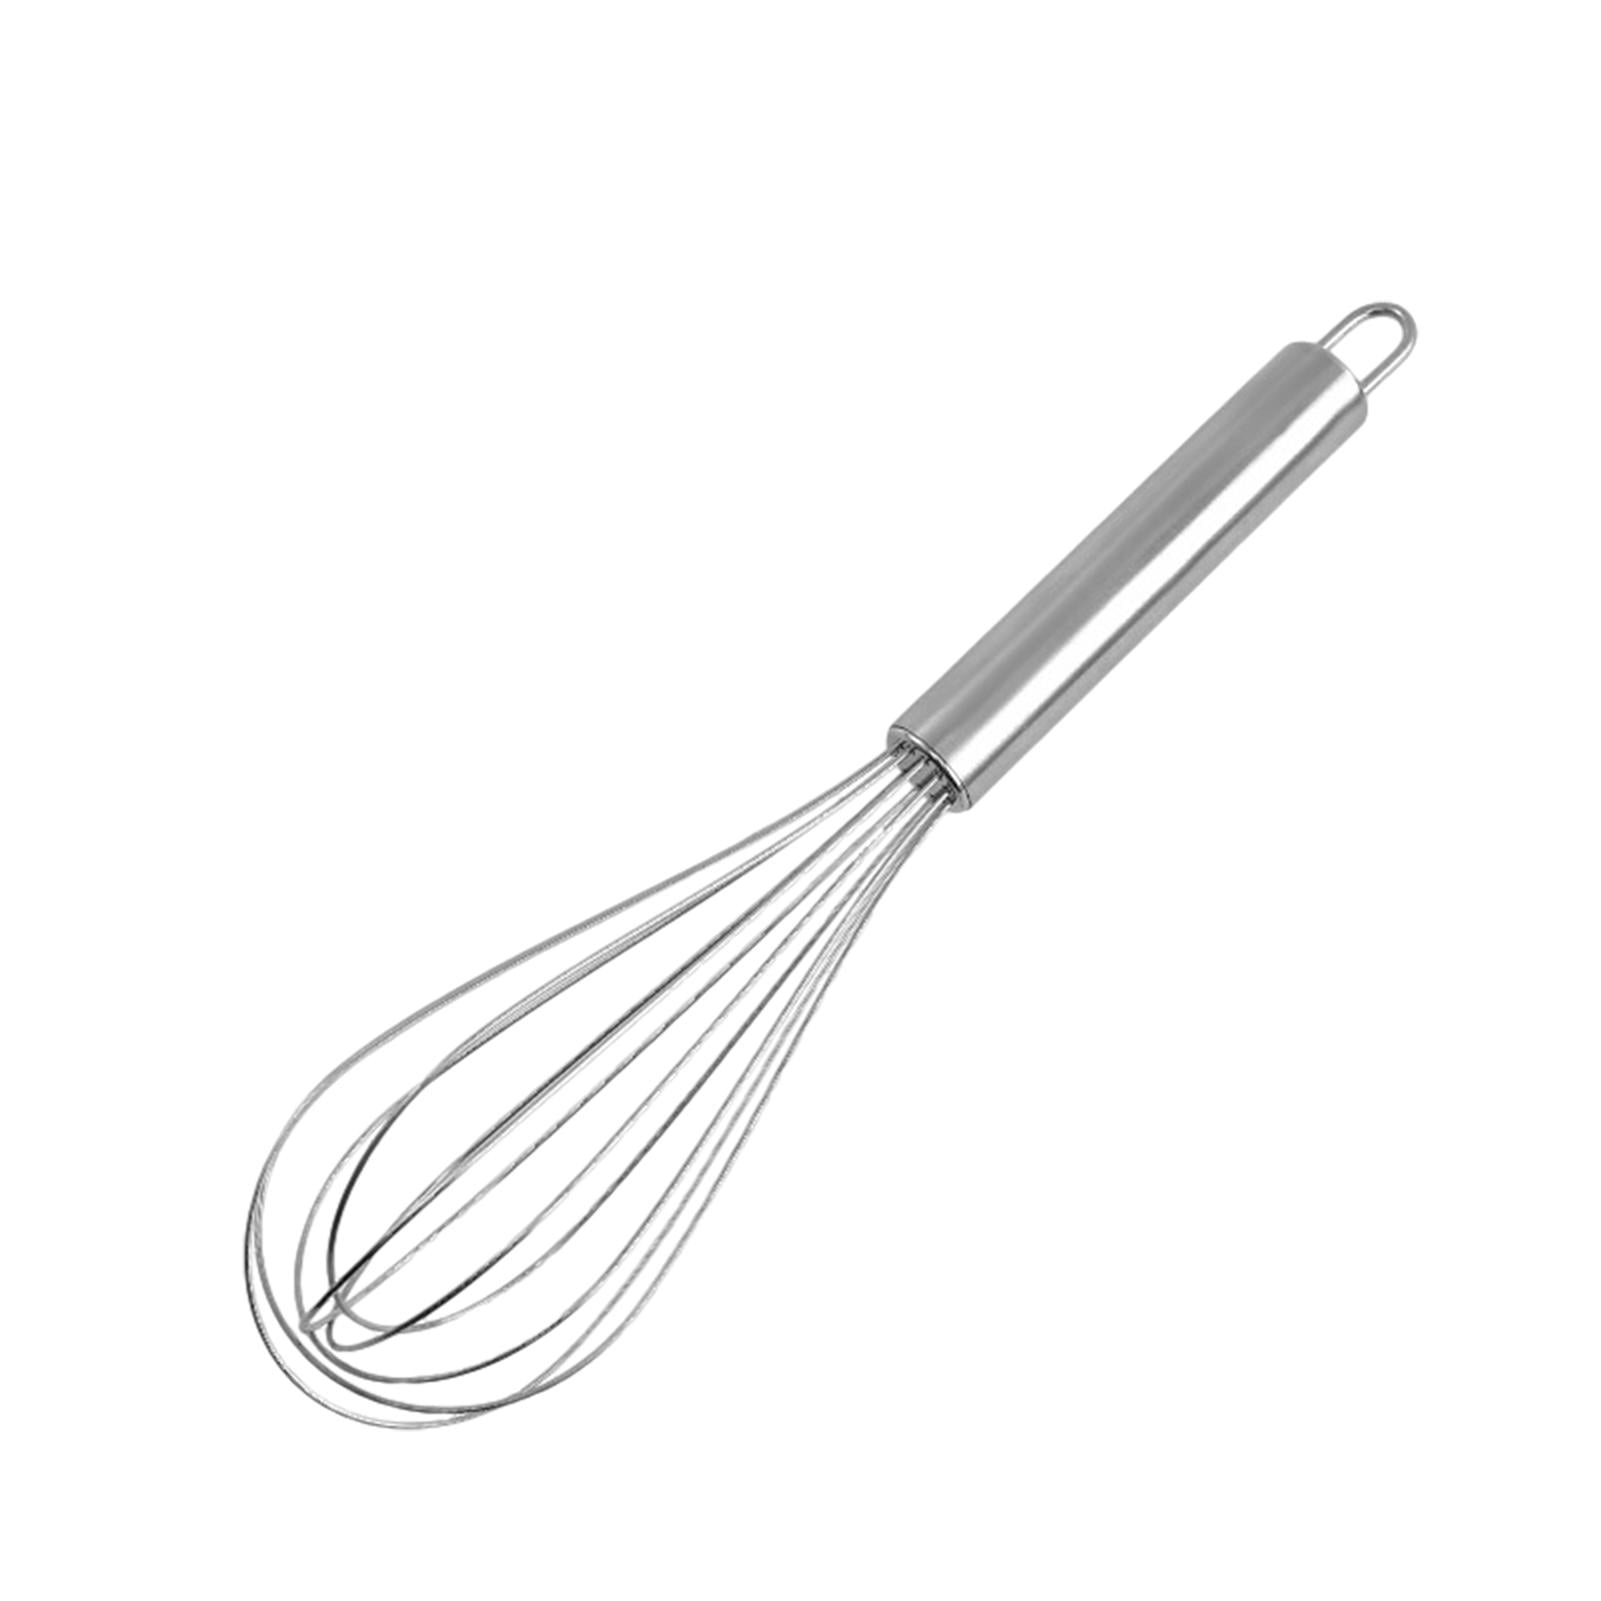 HASEGAWA Stainless Steel Whisk 8 Wires 250mm / Pink